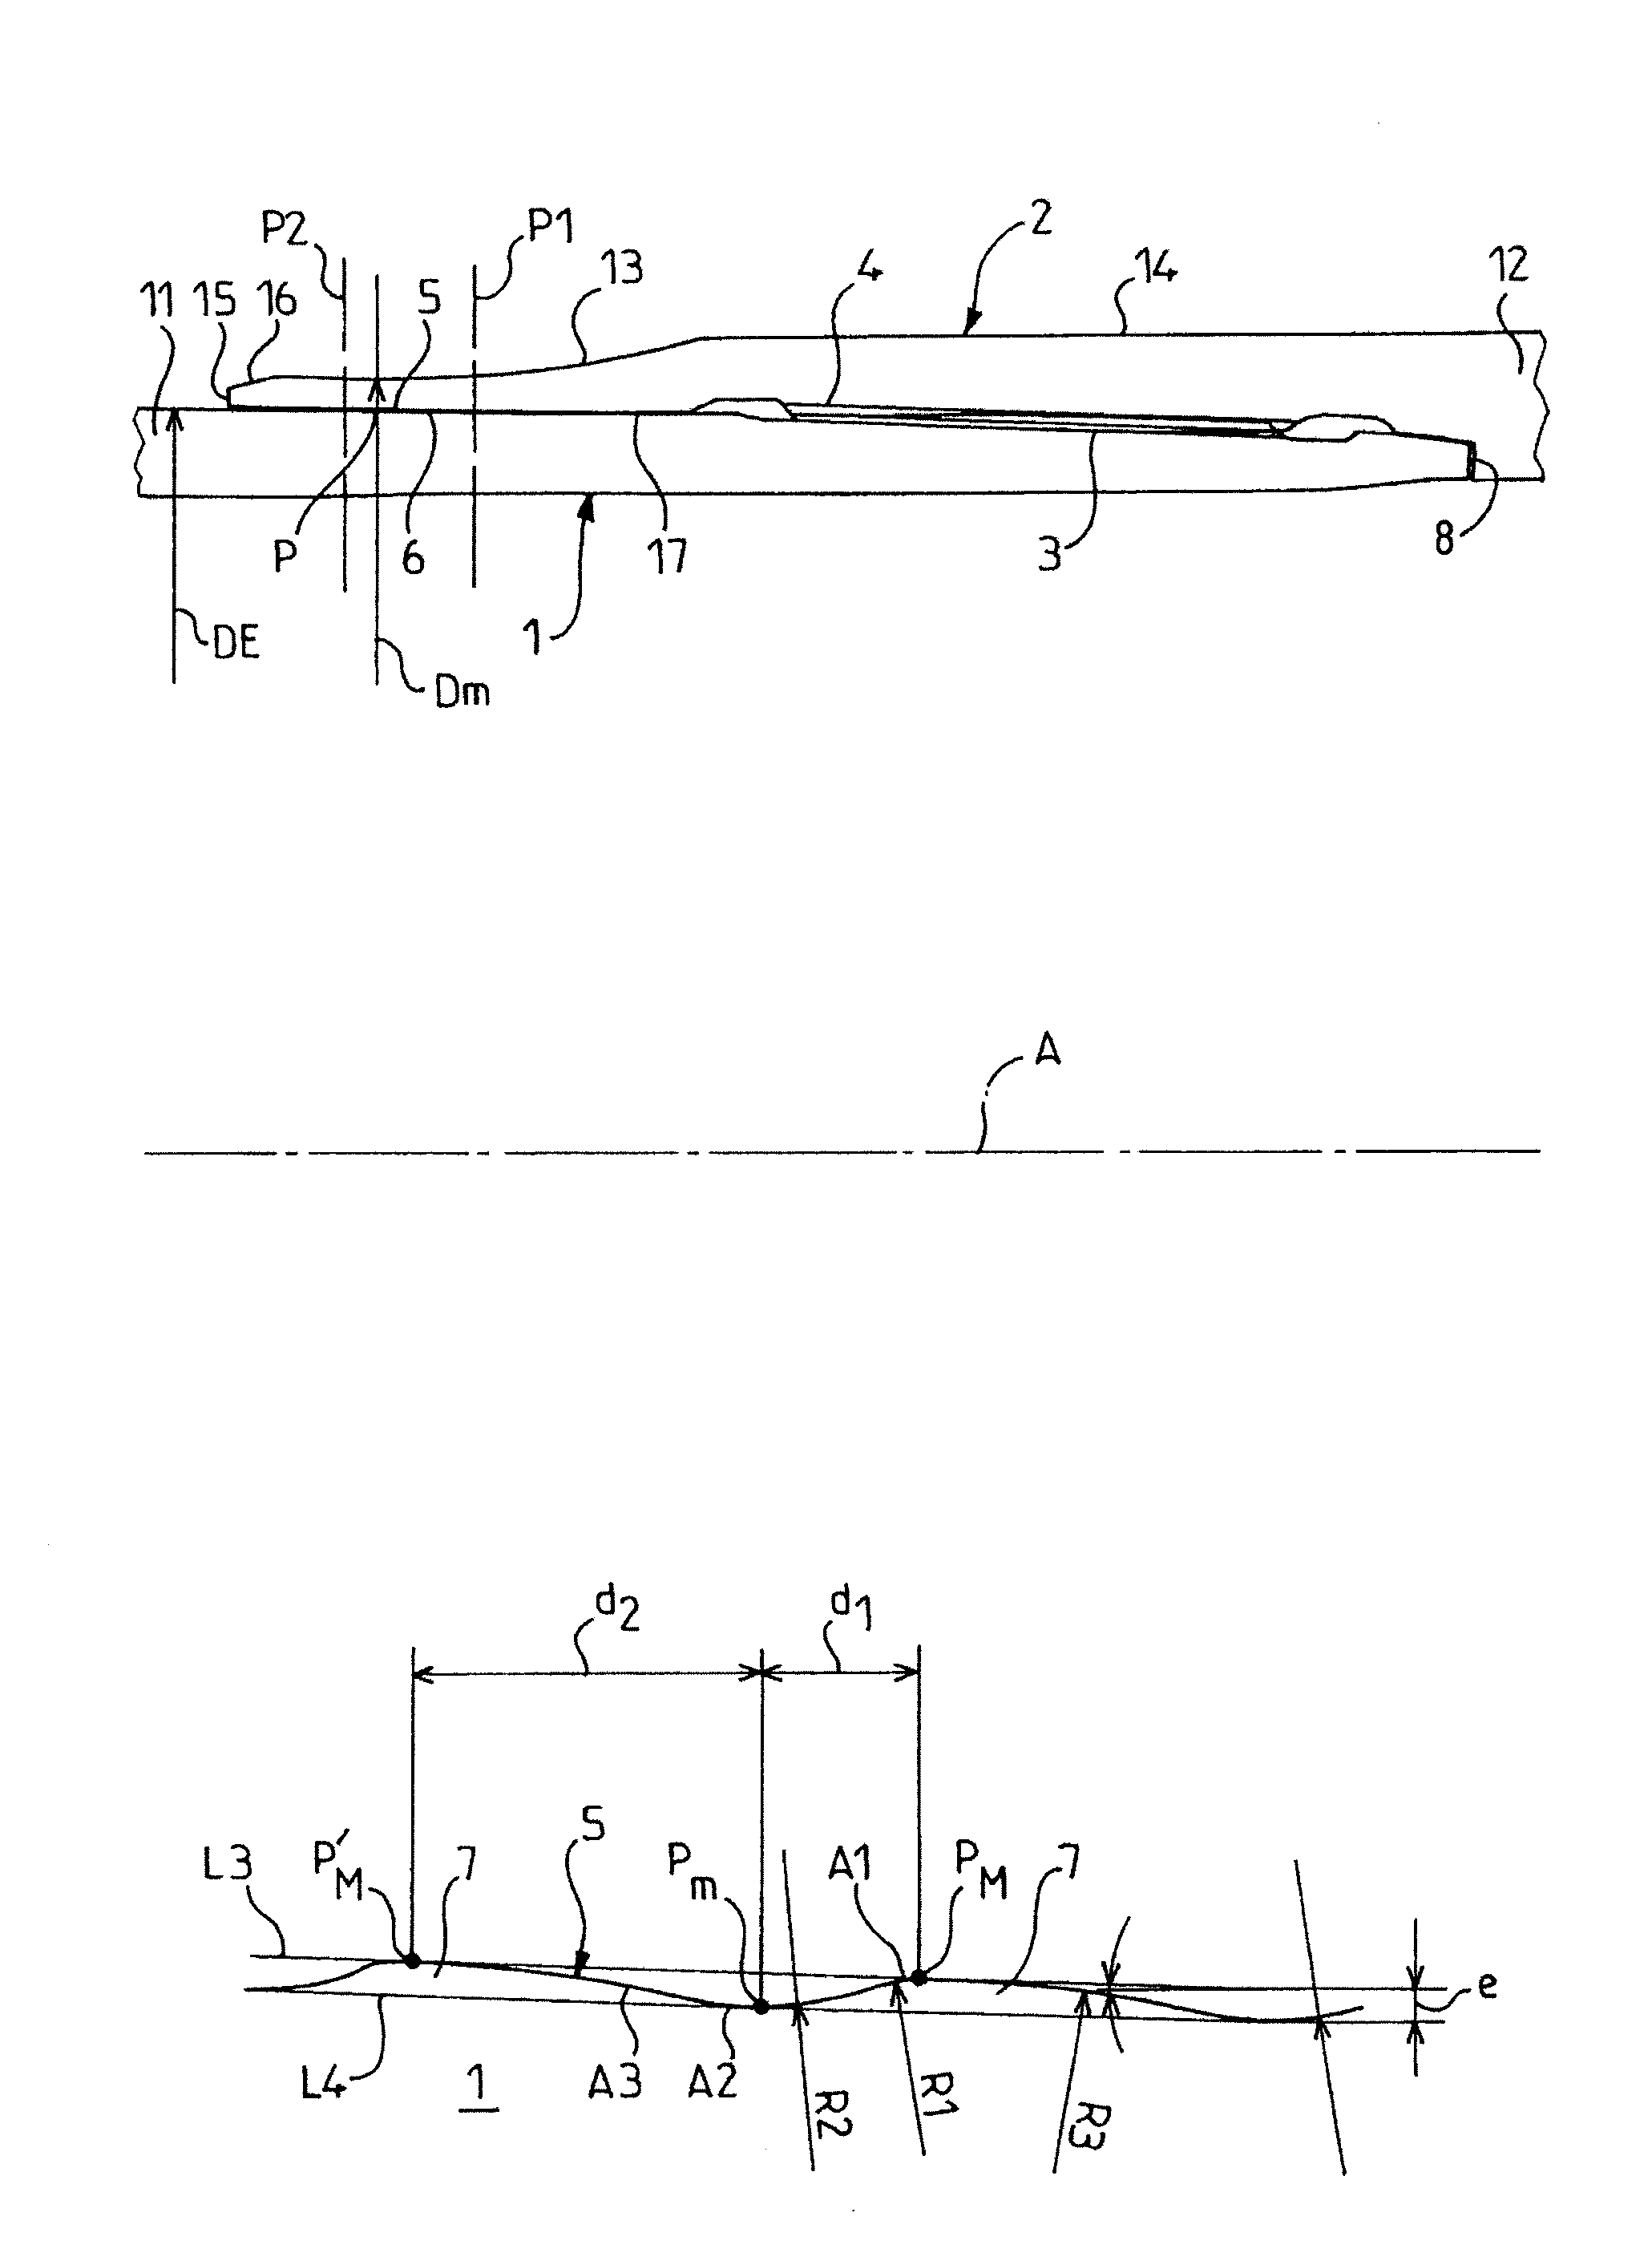 Threaded tubular connection which is resistant to bending stresses